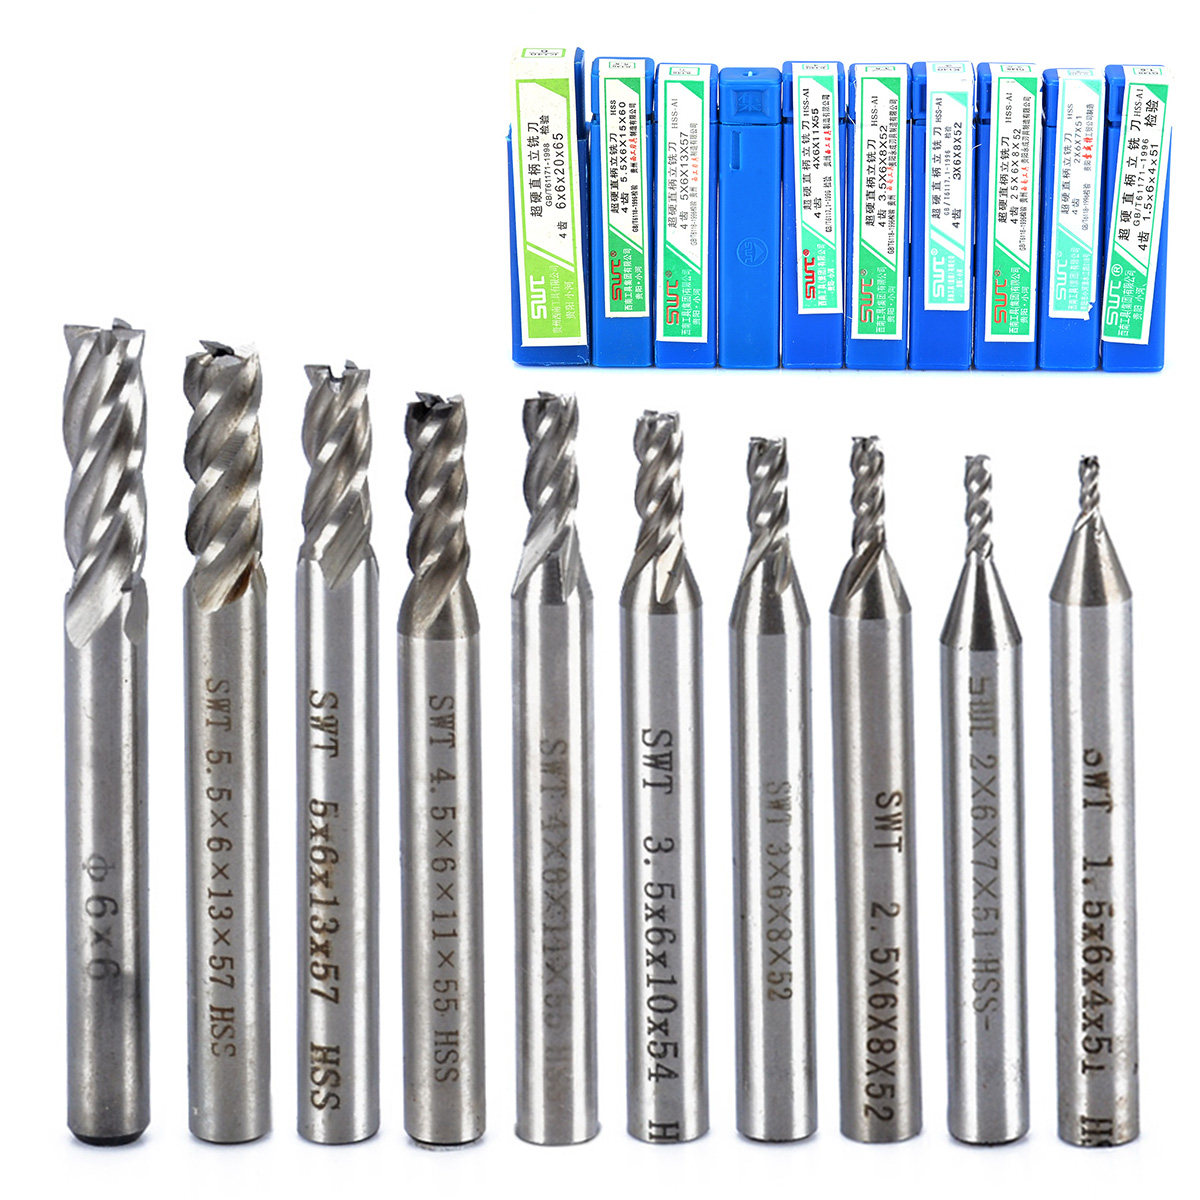 Straight Shank 4 Flutes End Mill Cutter Set for CNC Milling Machine Tool Bit 